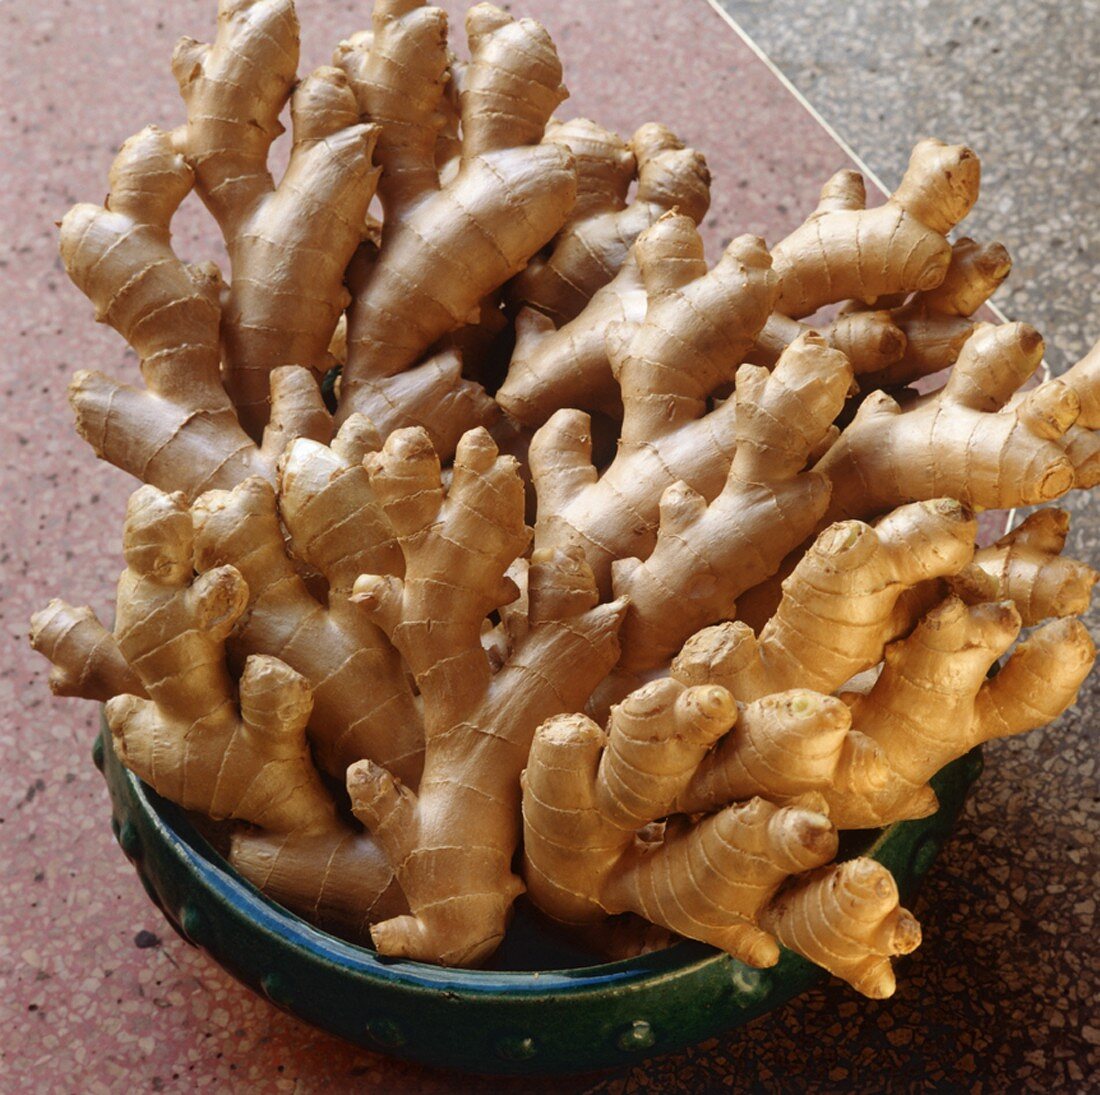 Many Ginger Roots in a Bowl